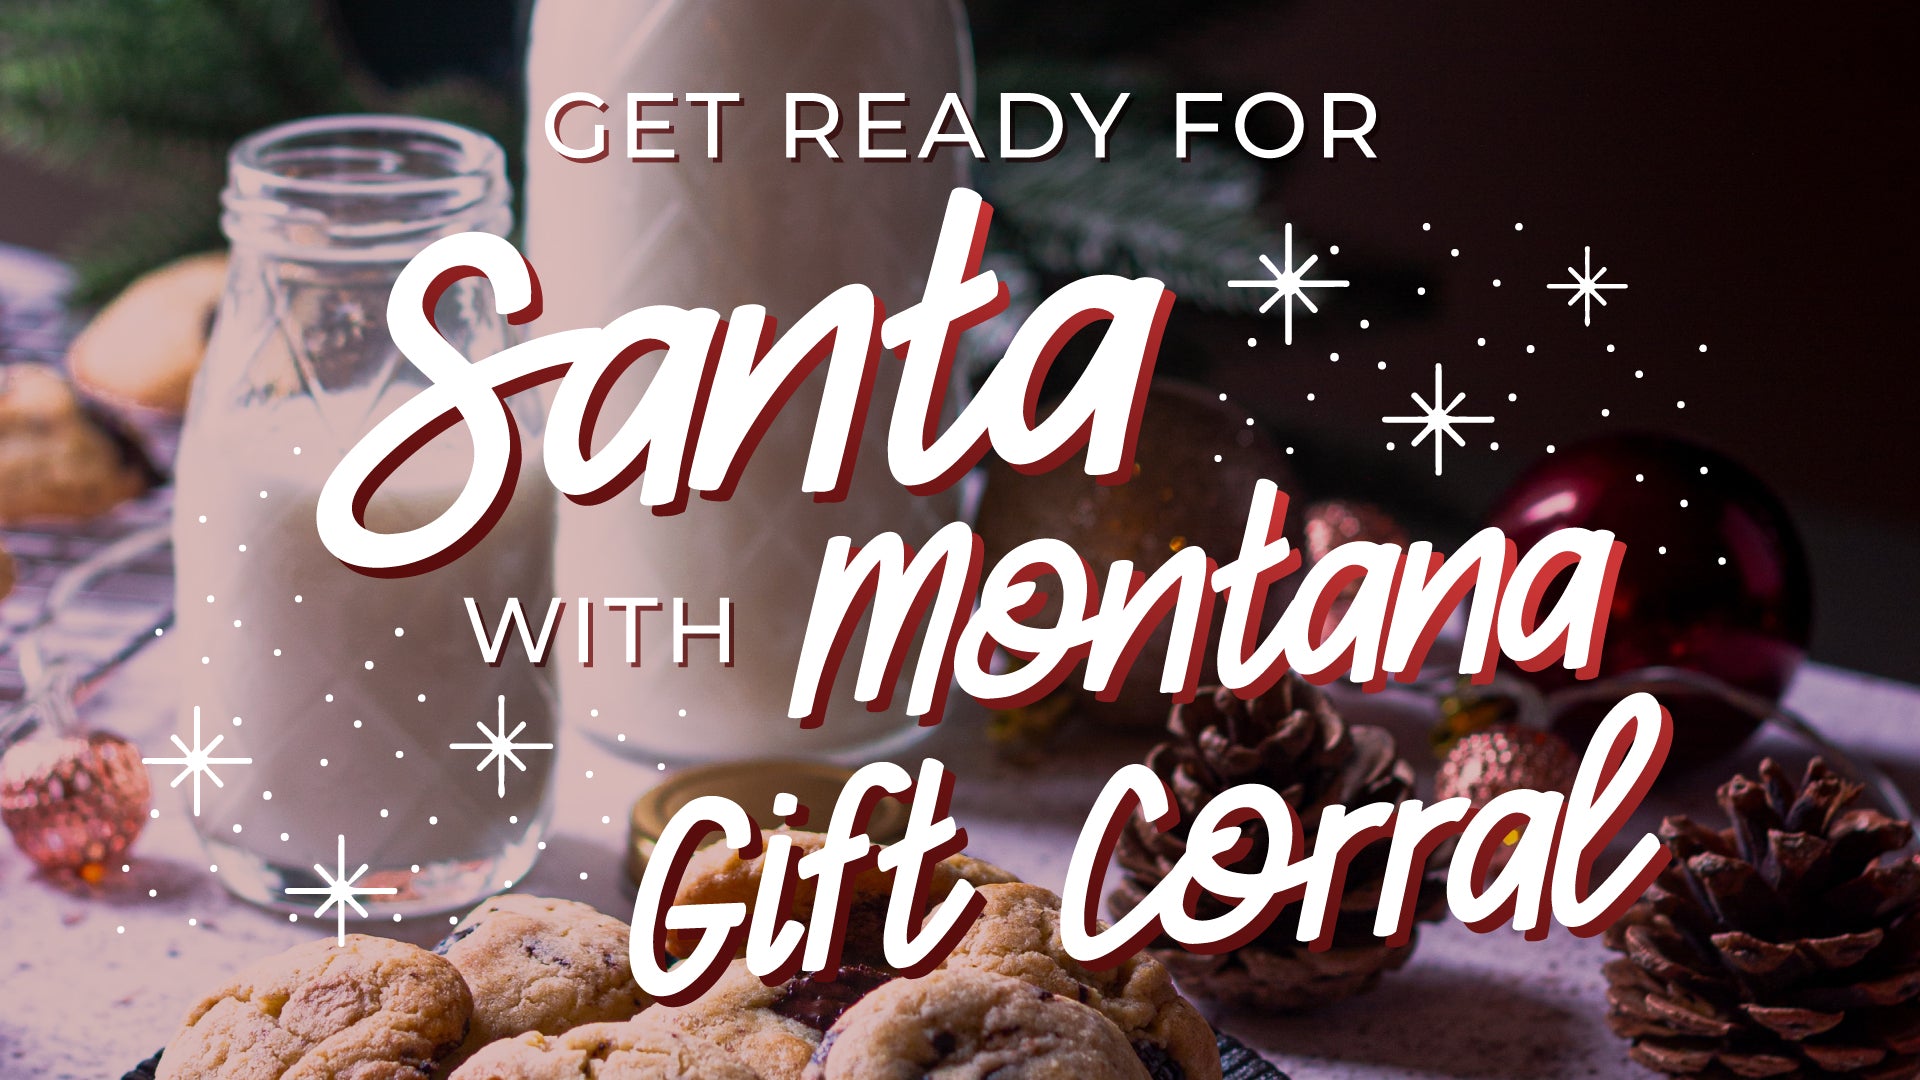 Get Ready for Santa with Montana Gift Corral